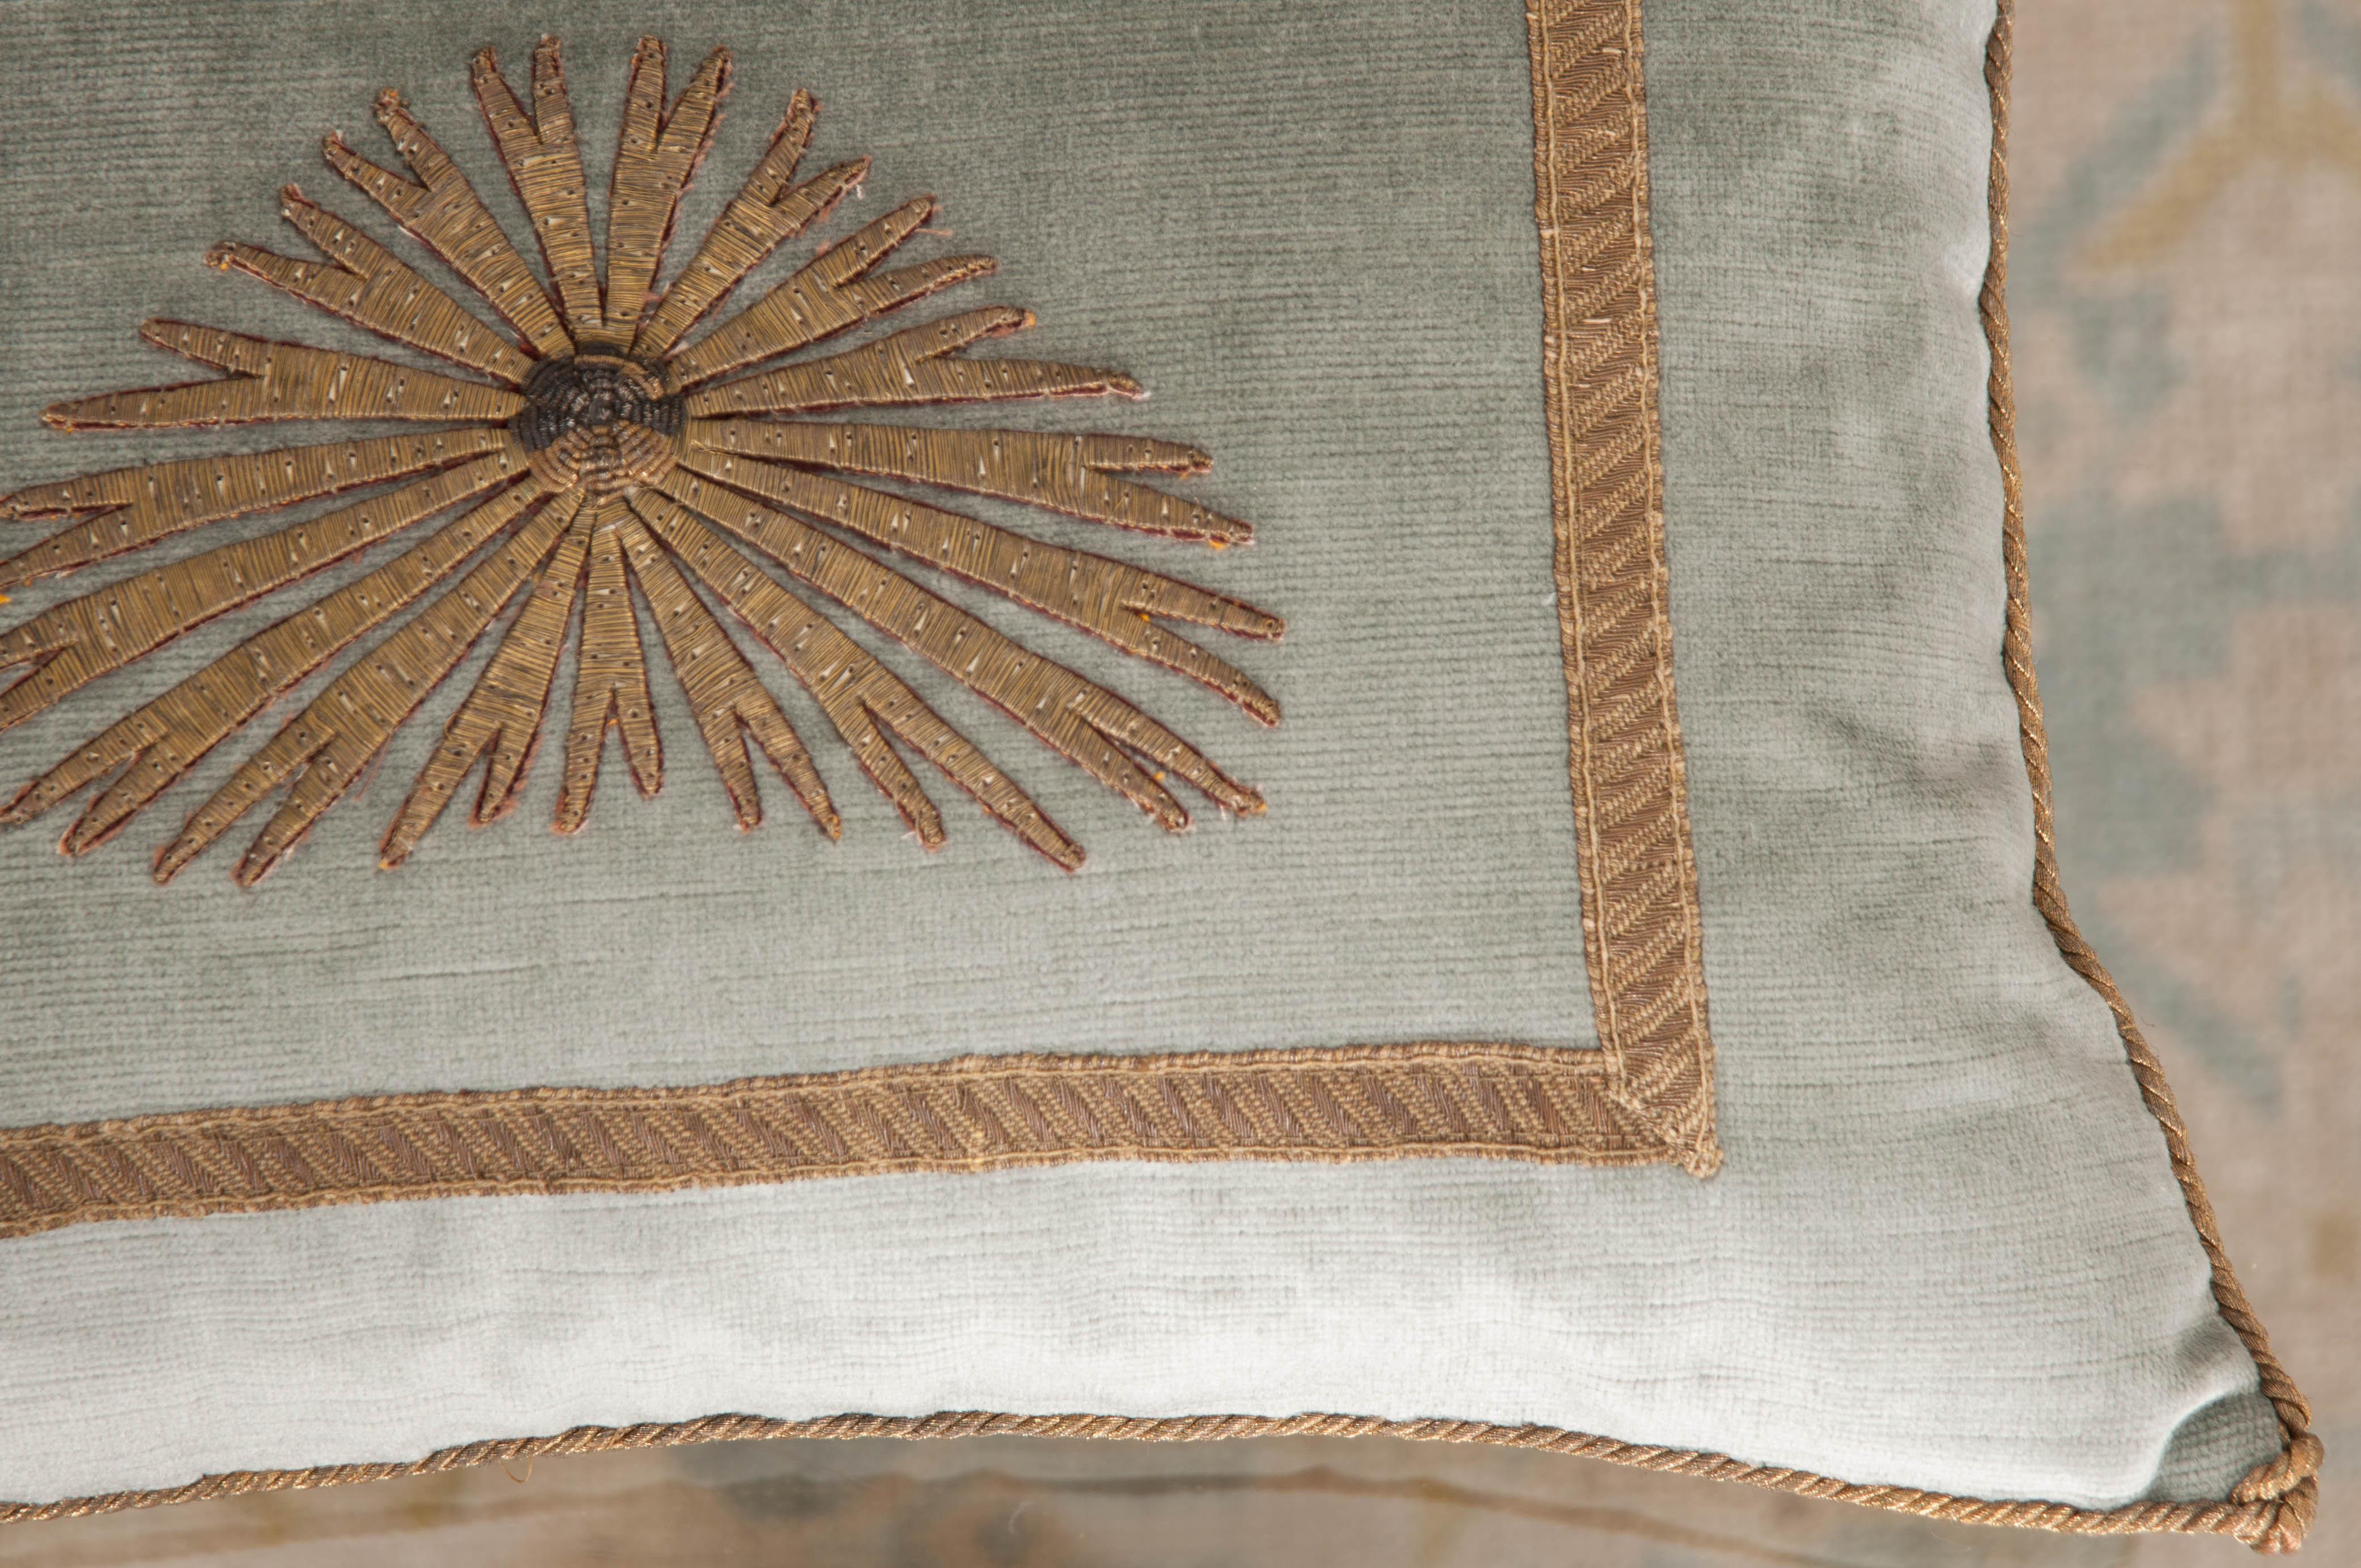 Antique ottoman Empire raised gold metallic embroidery depicting a starburst. Framed with antique gold metallic galon on pale French blue velvet. Hand-trimmed with vintage gold metallic cording which is knotted in the corners. Designed by Becky